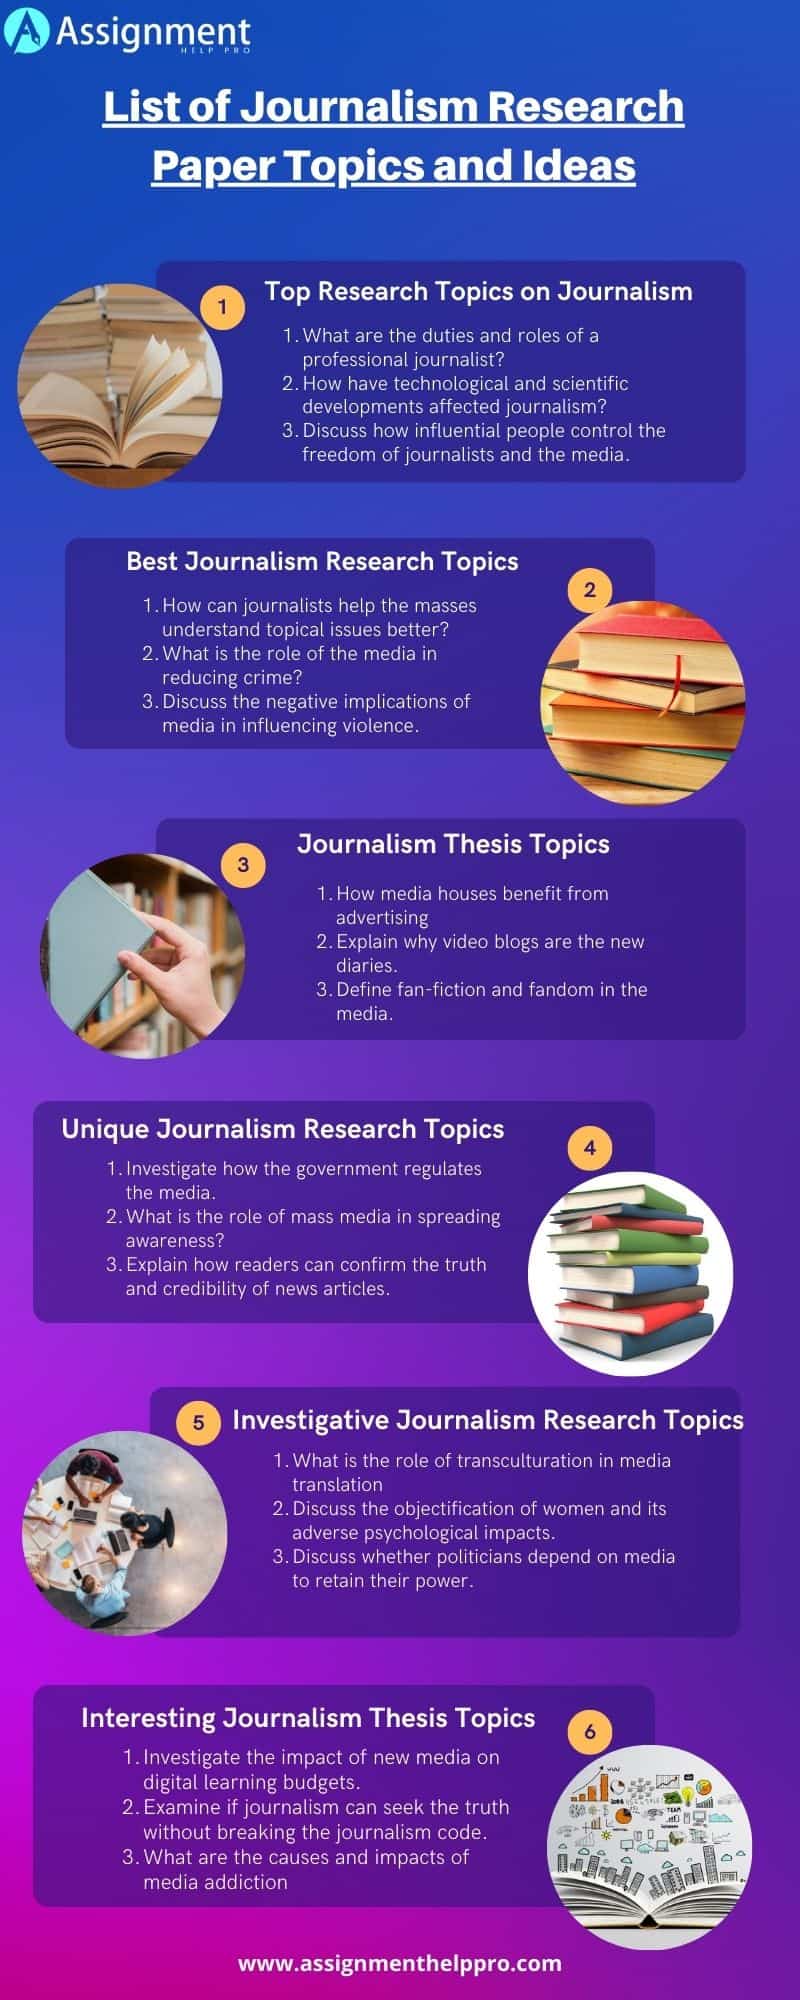 Journalism Research Topics